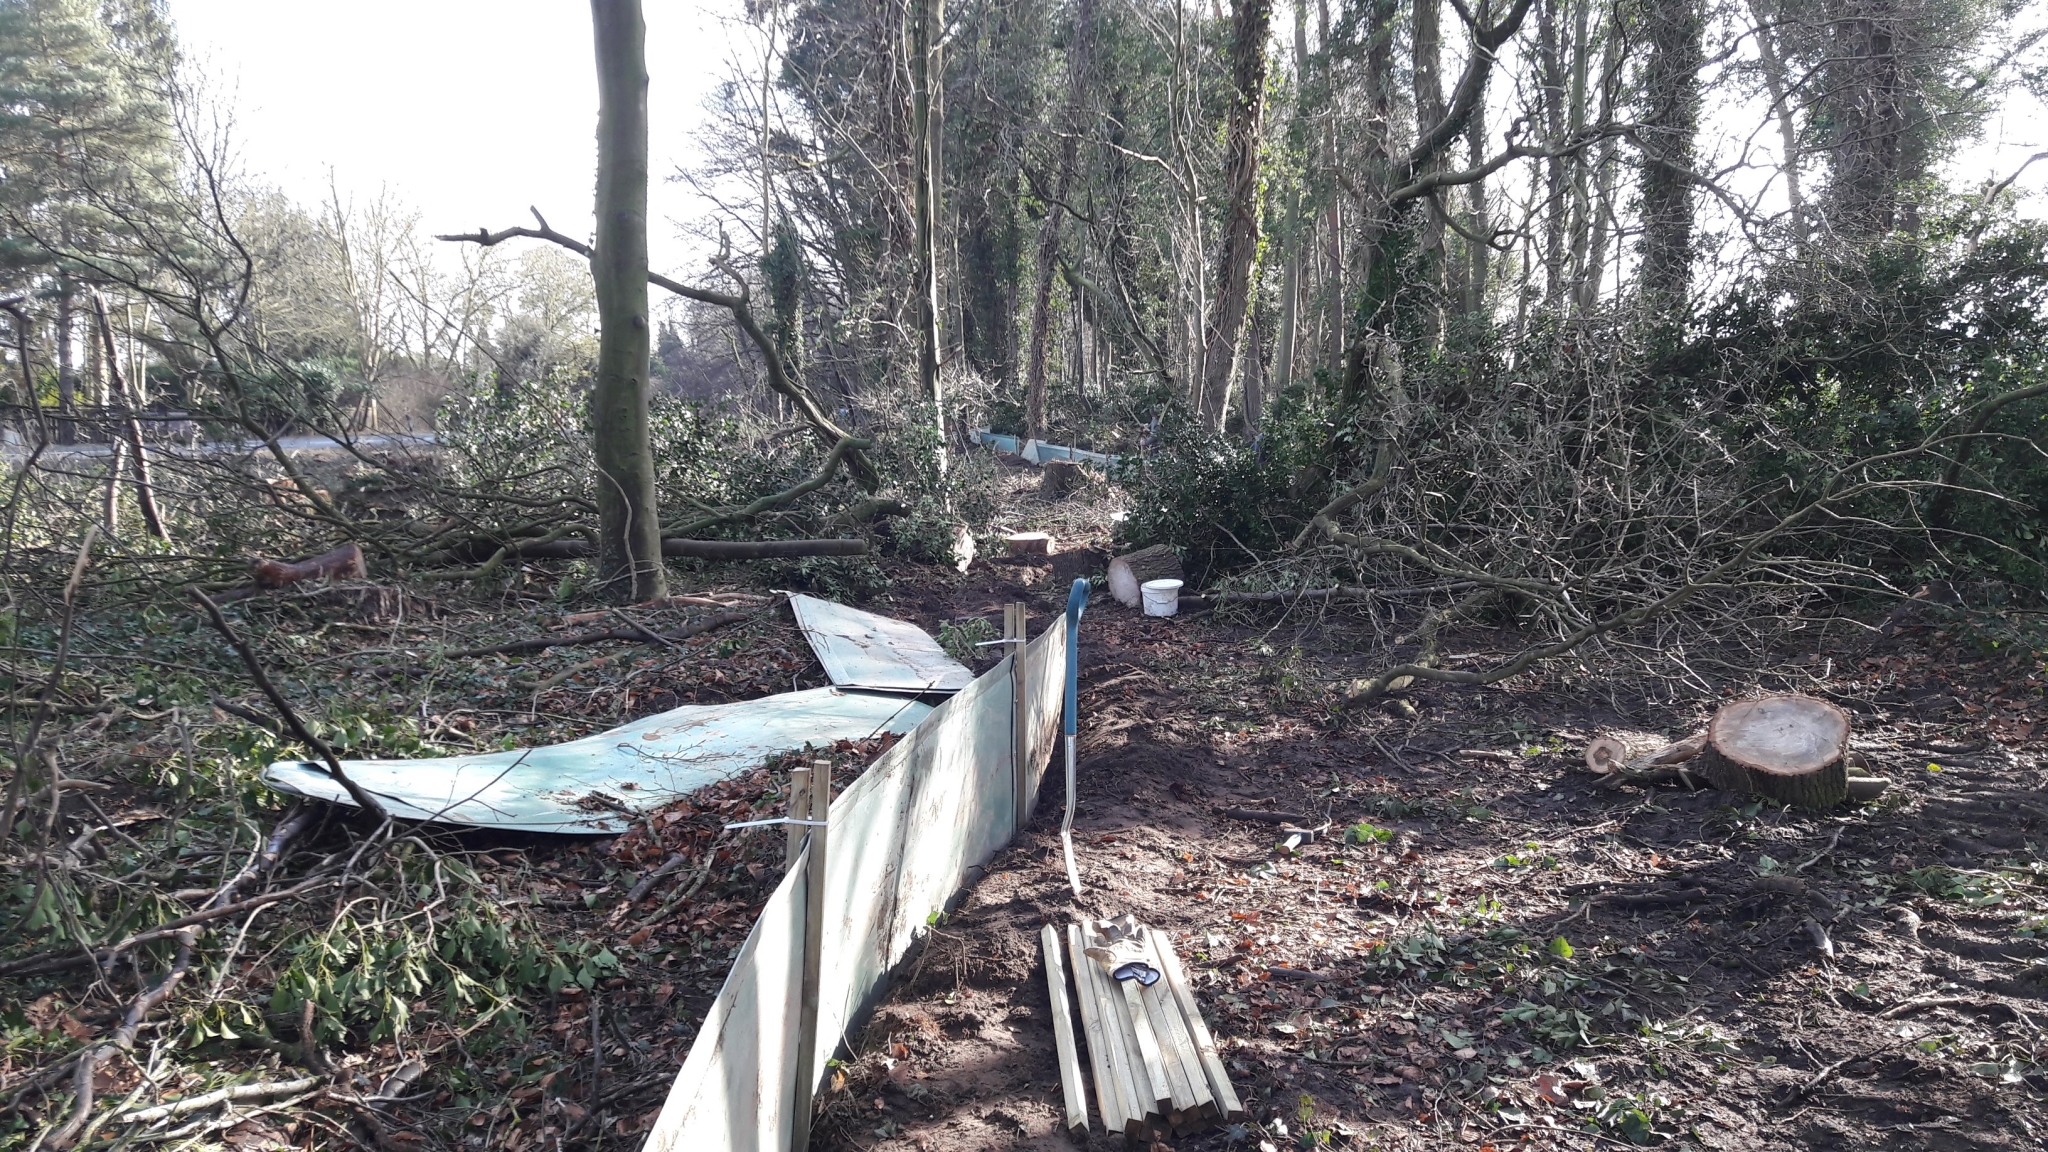 A photo from the FoTF Conservation Event - February 2018 - Erecting the Toad Fence at Cranwich : A section of partially erected fence